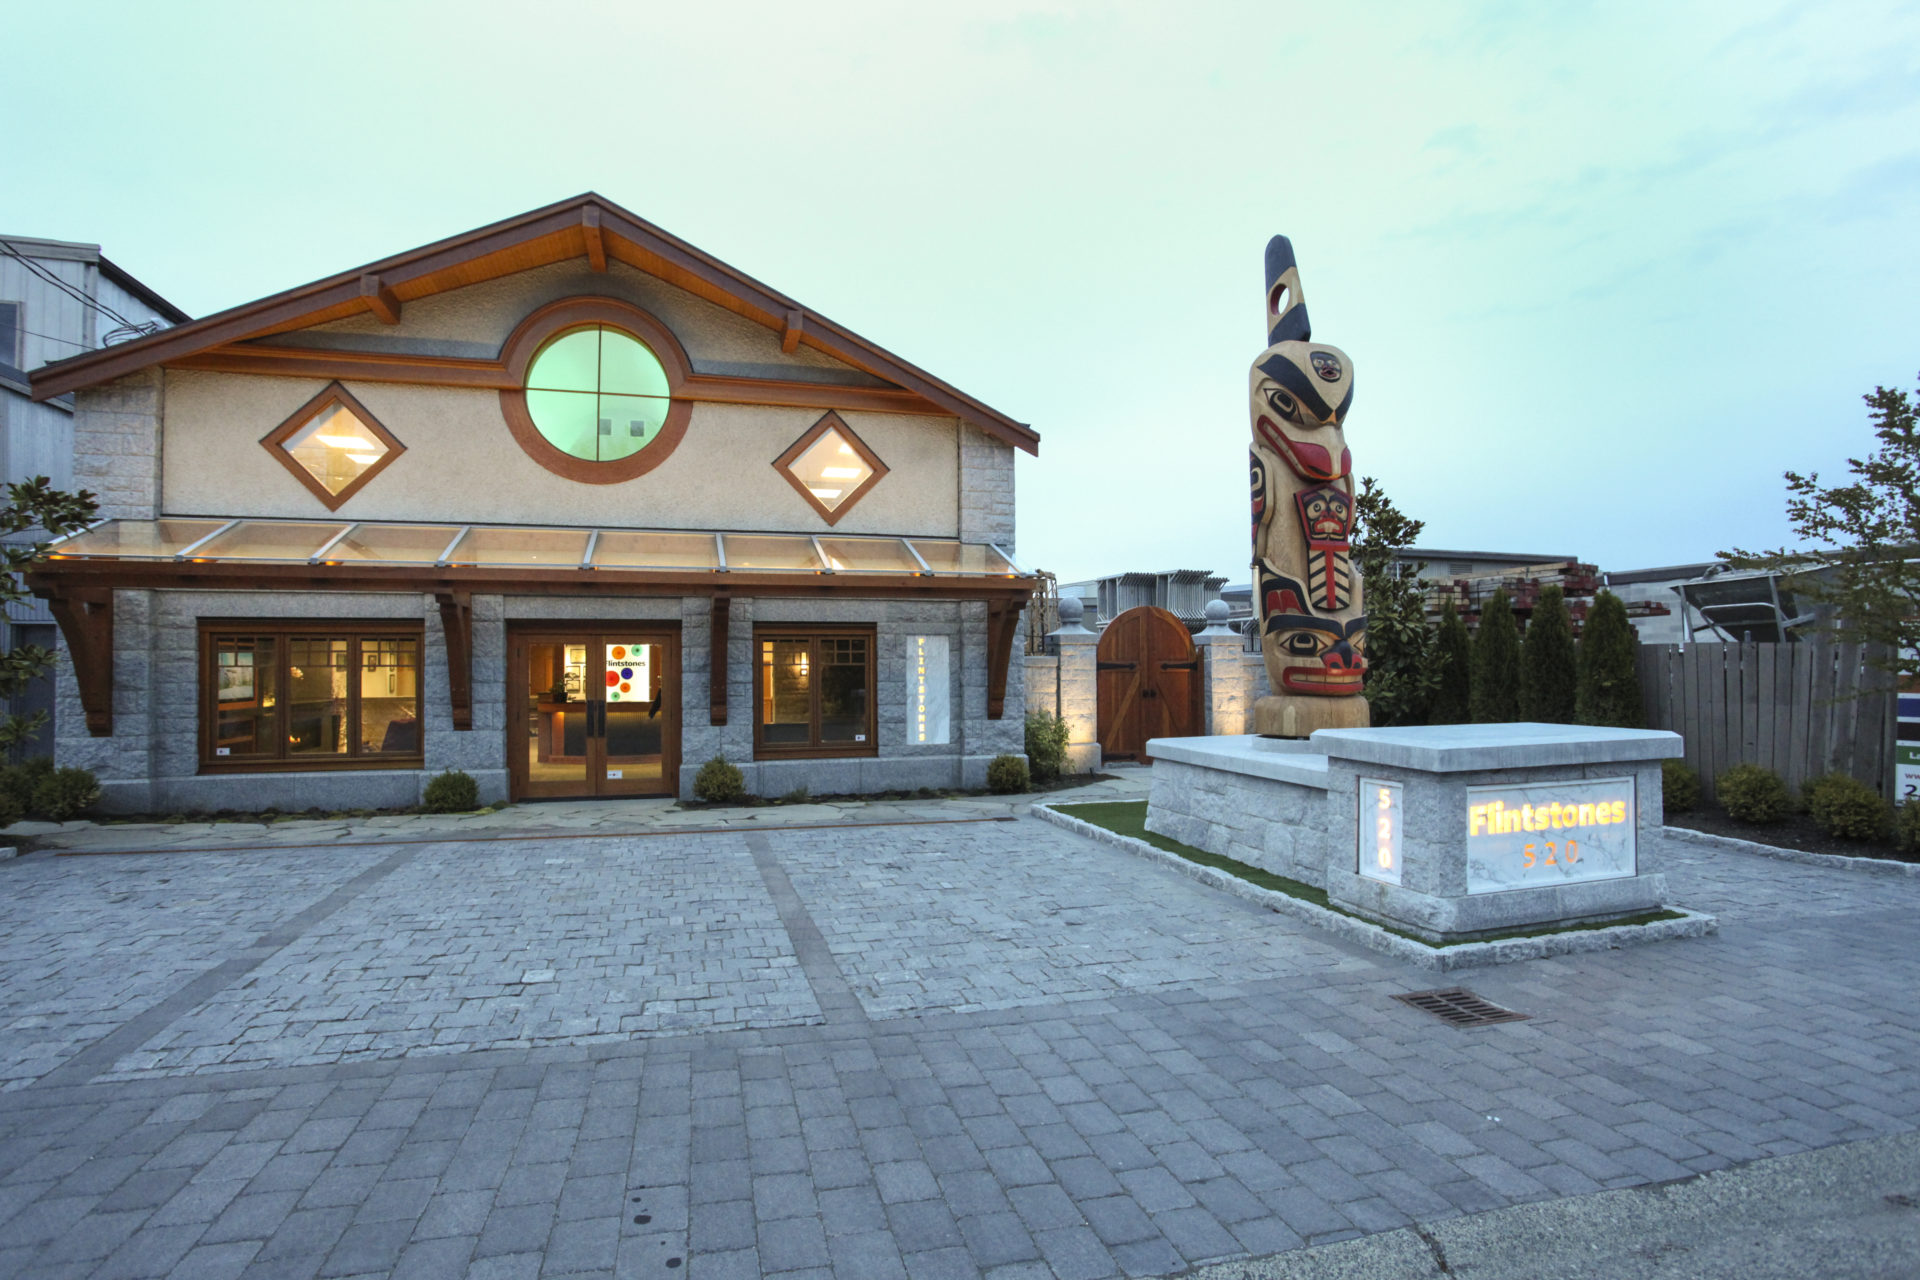 Two-level building with large stone driveway, glass awning, and totem pole